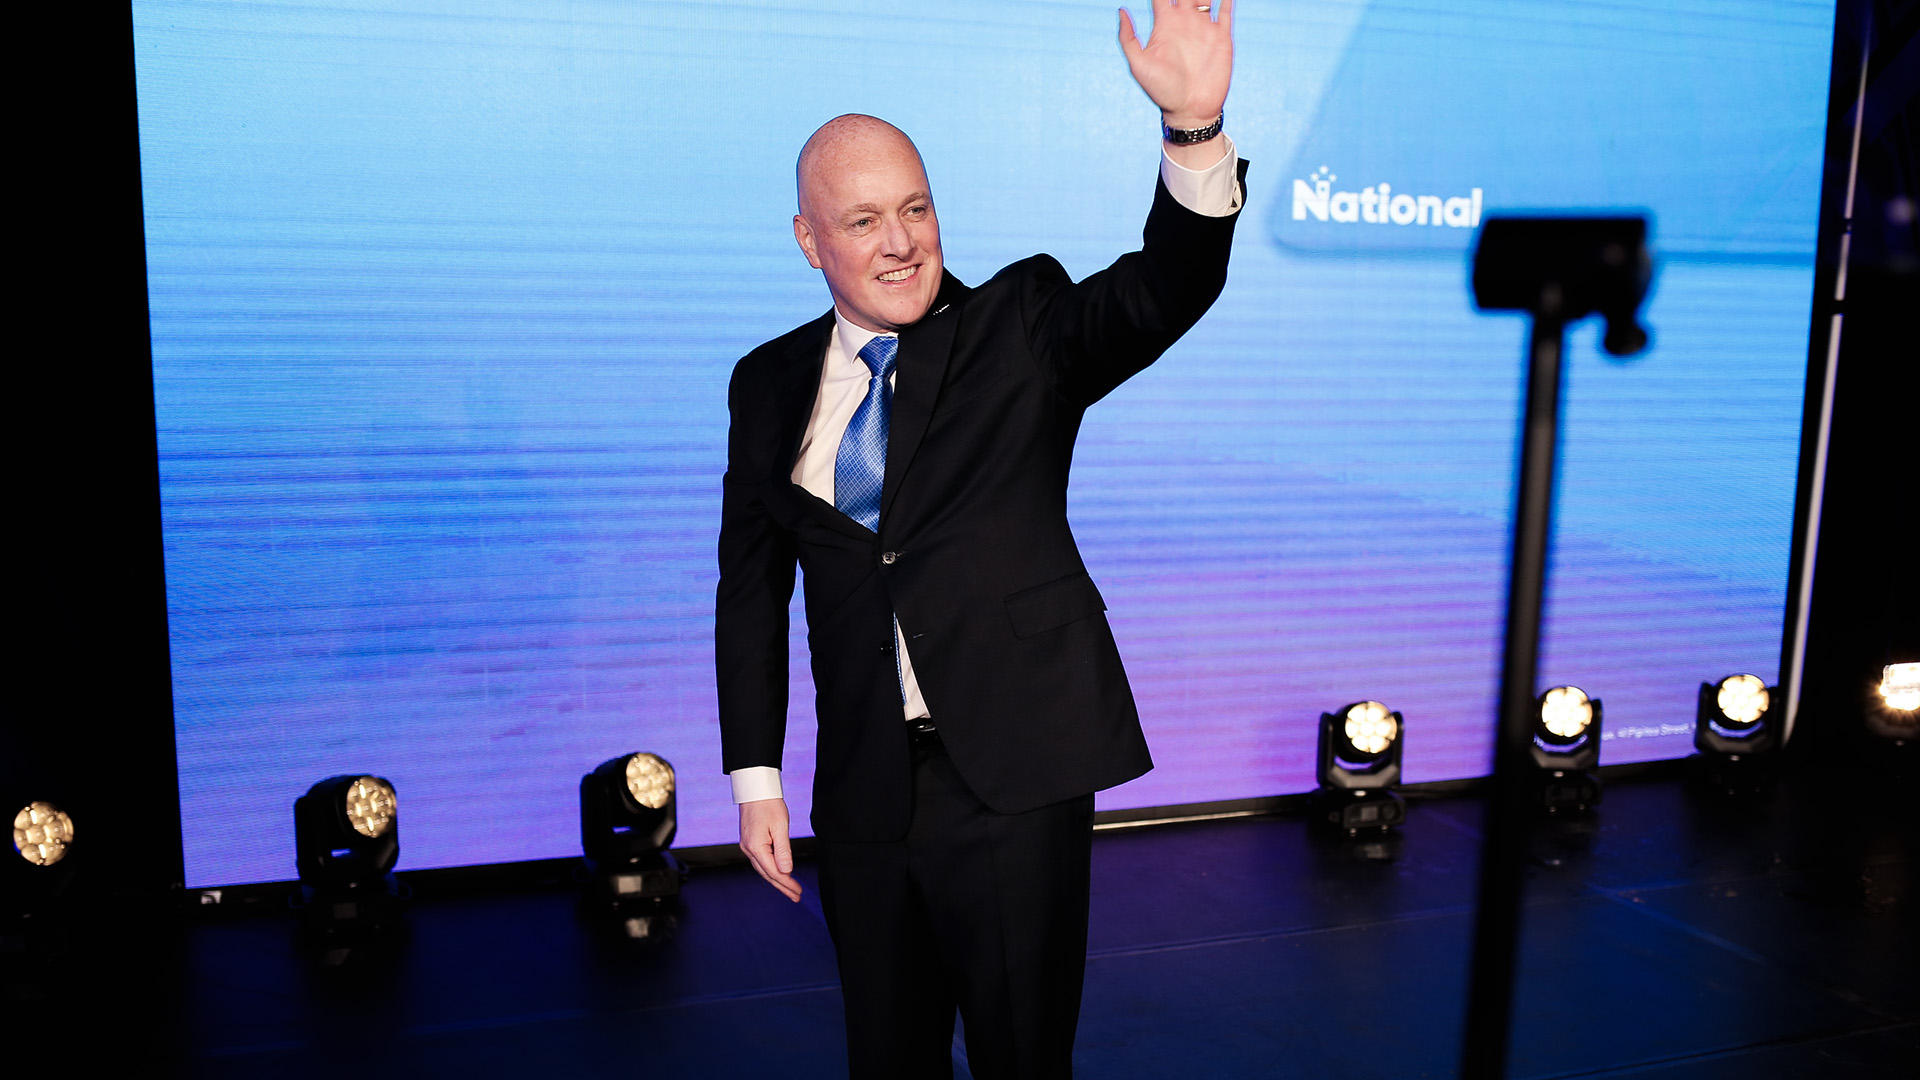 Christopher Luxon’s National Party has won the election and will lead the next Government.